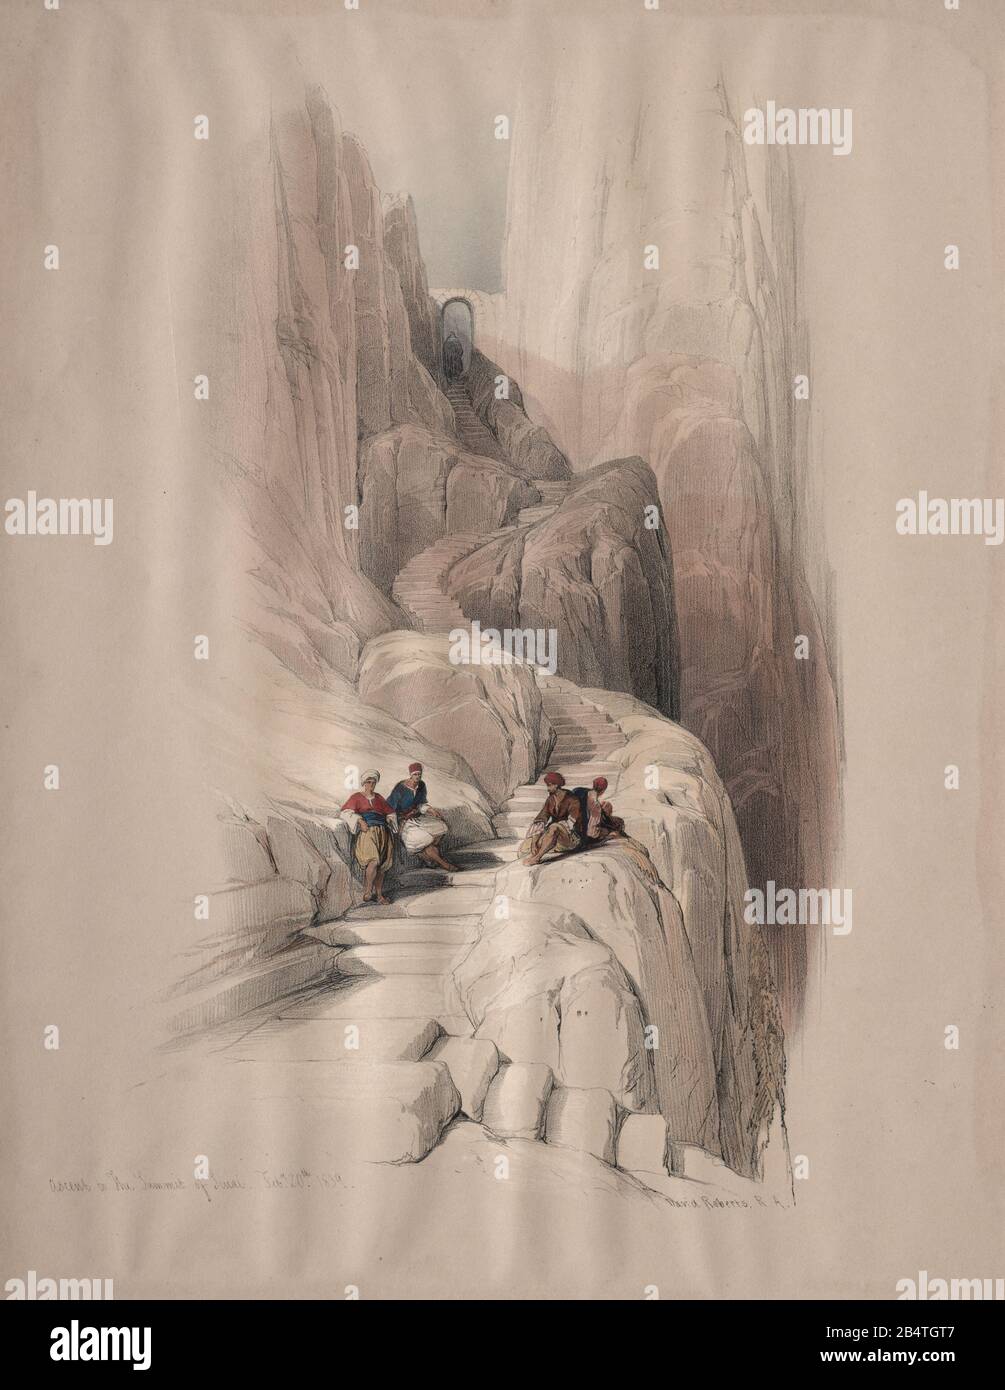 Ascent to the Summit of Sinai Color lithograph by David Roberts (1796-1864). An engraving reprint by Louis Haghe was published in a the book 'The Holy Land, Syria, Idumea, Arabia, Egypt and Nubia. in 1855 by D. Appleton & Co., 346 & 348 Broadway in New York. Stock Photo